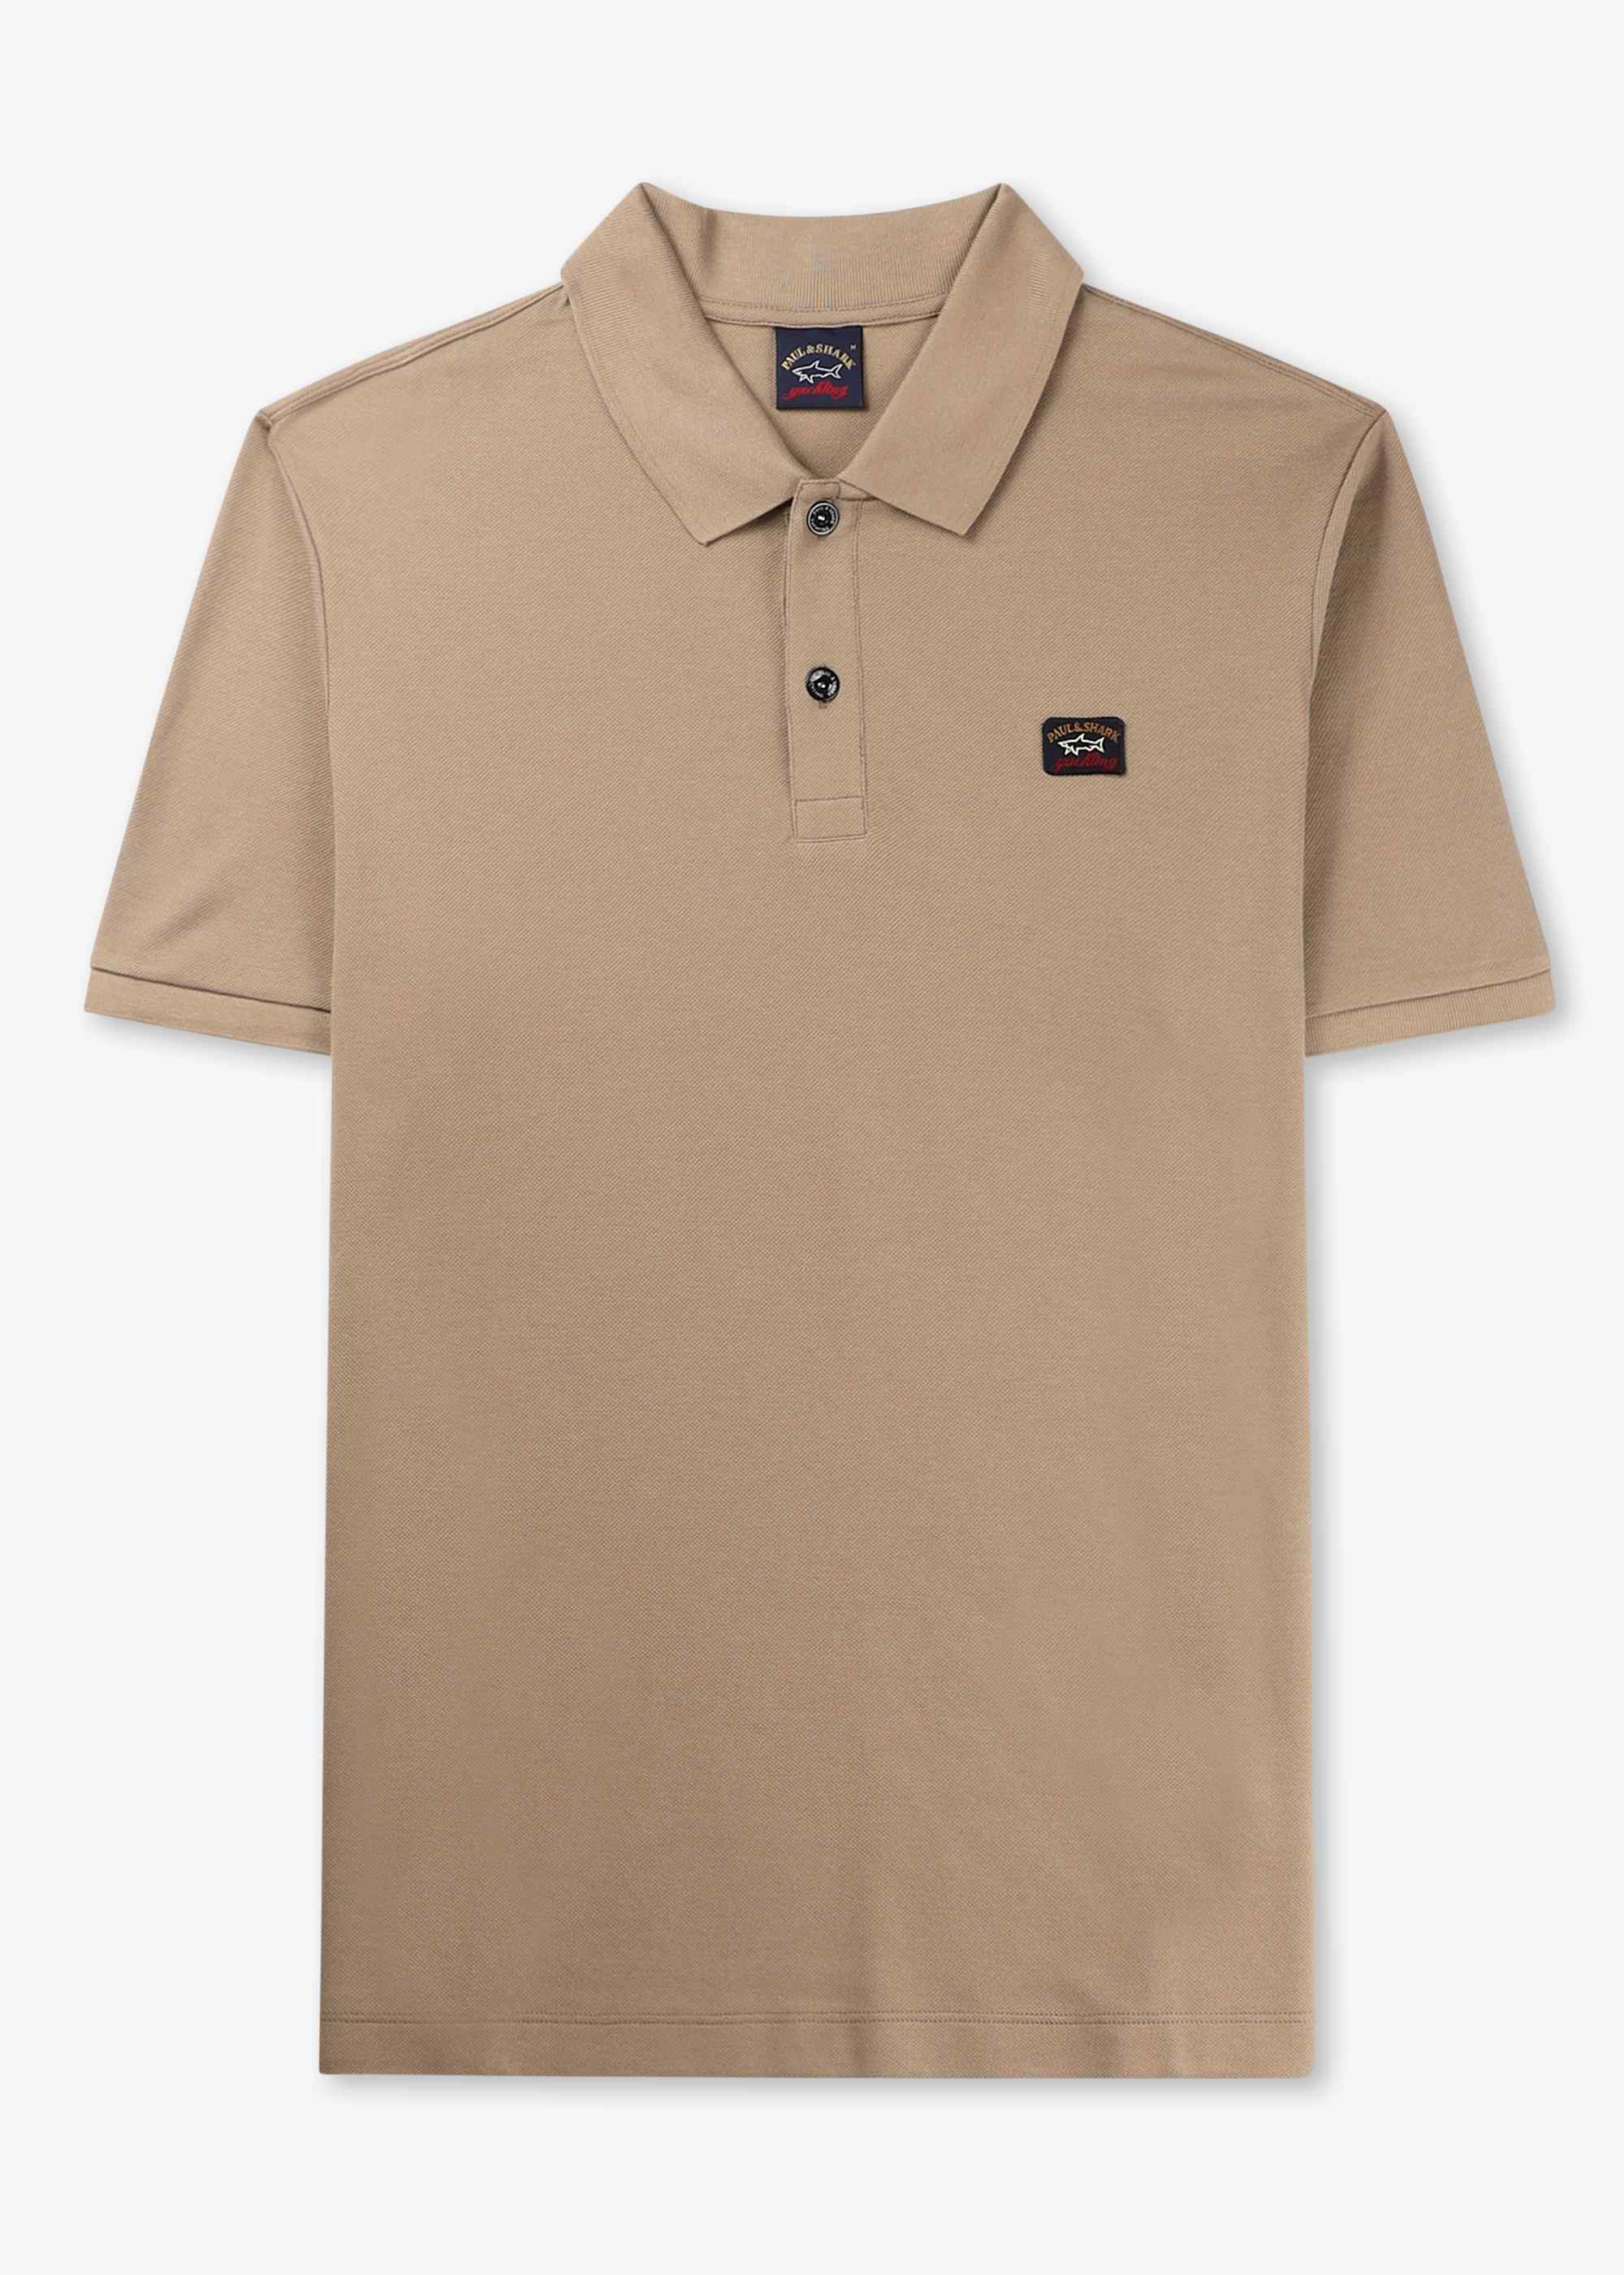 Paul & Shark Mens Cotton Pique Polo Shirt With Iconic Badge In Neutral